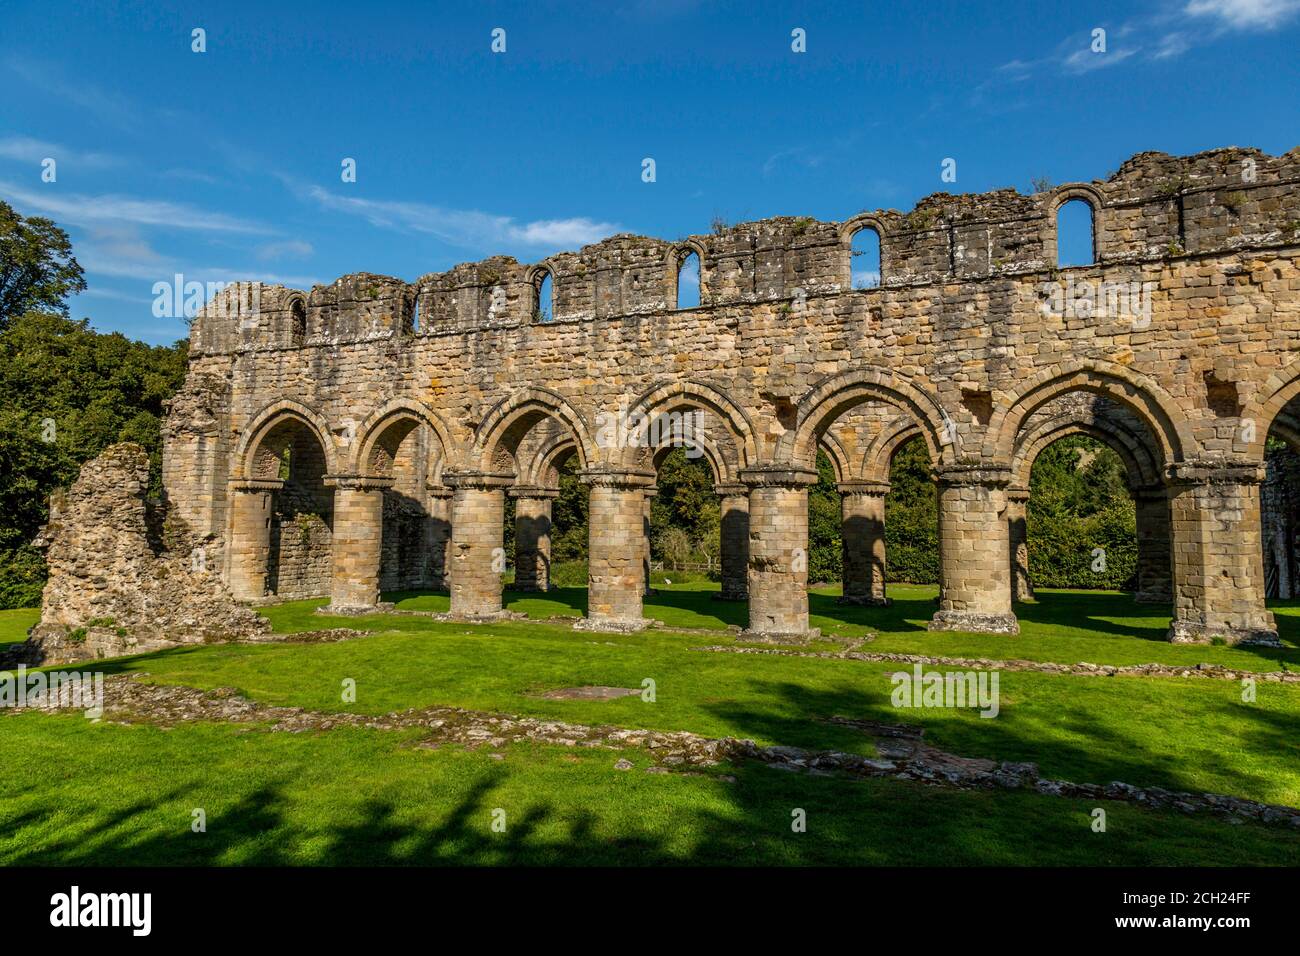 The ruins of Buildwas Abbey, a 12th Century Cistercian Monastery, located next to the River Severn in Buildwas, Shropshire, England. Stock Photo